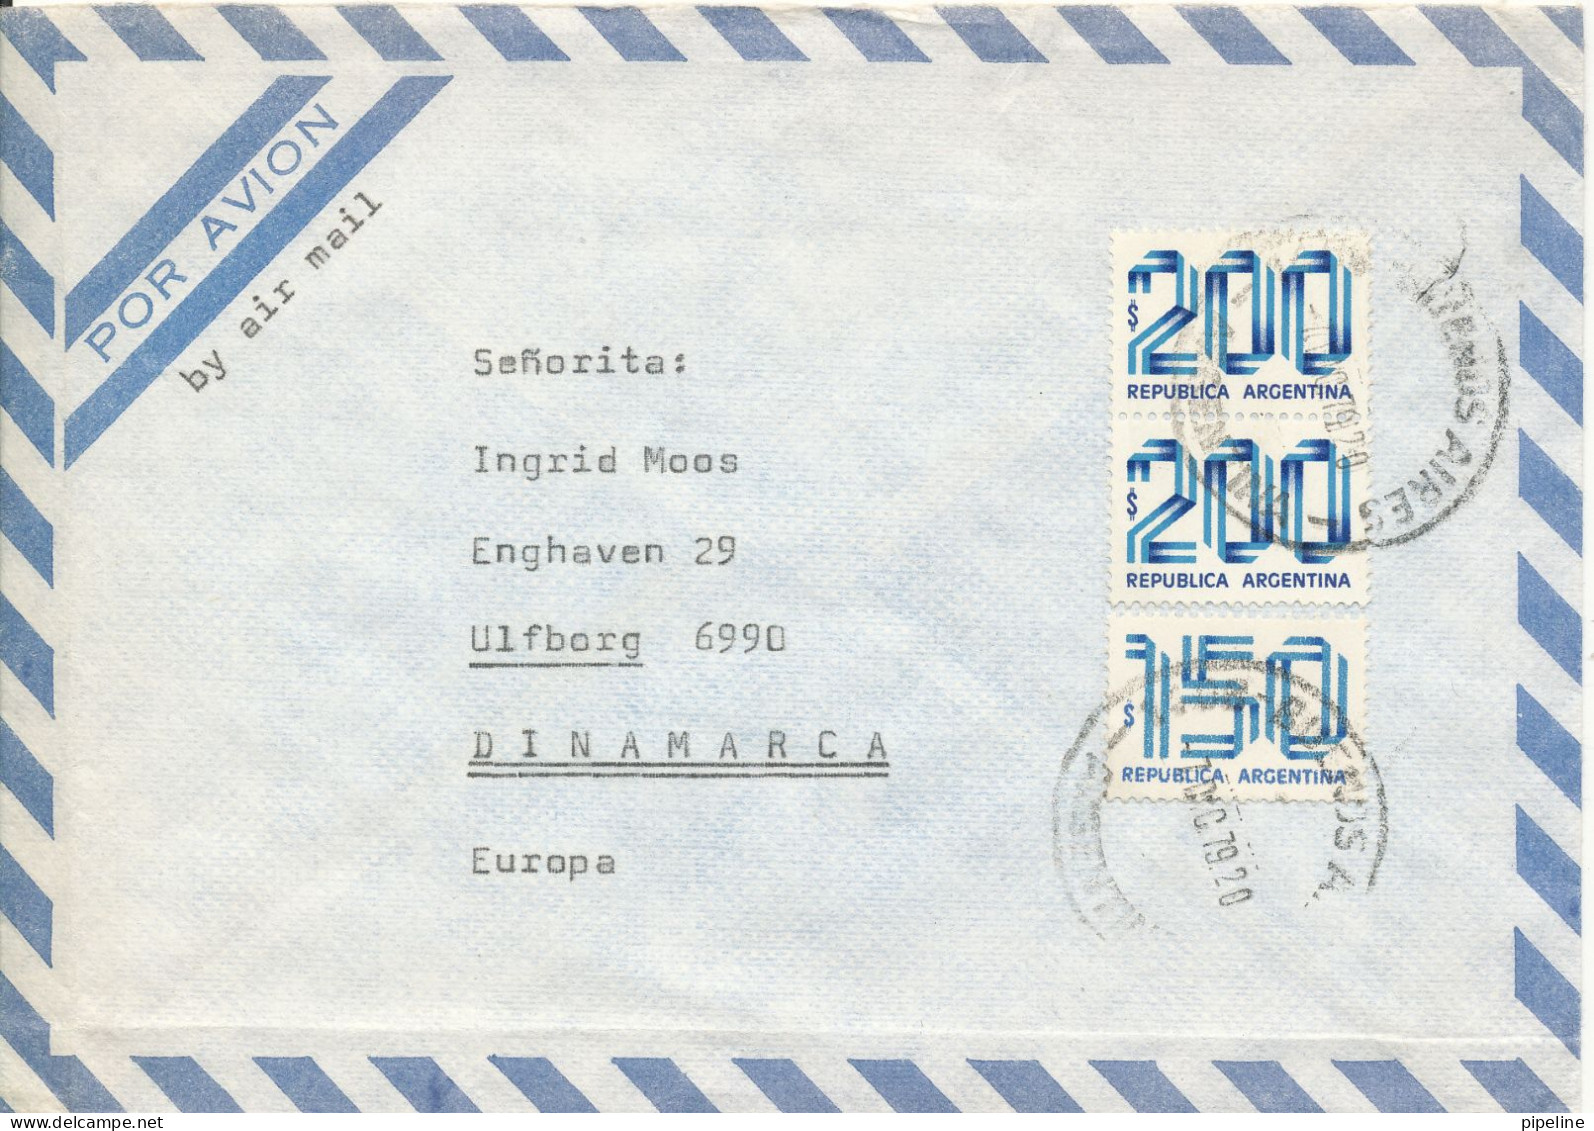 Argentina Air Mail Cover Sent To Denmark 7-12-1979 - Airmail